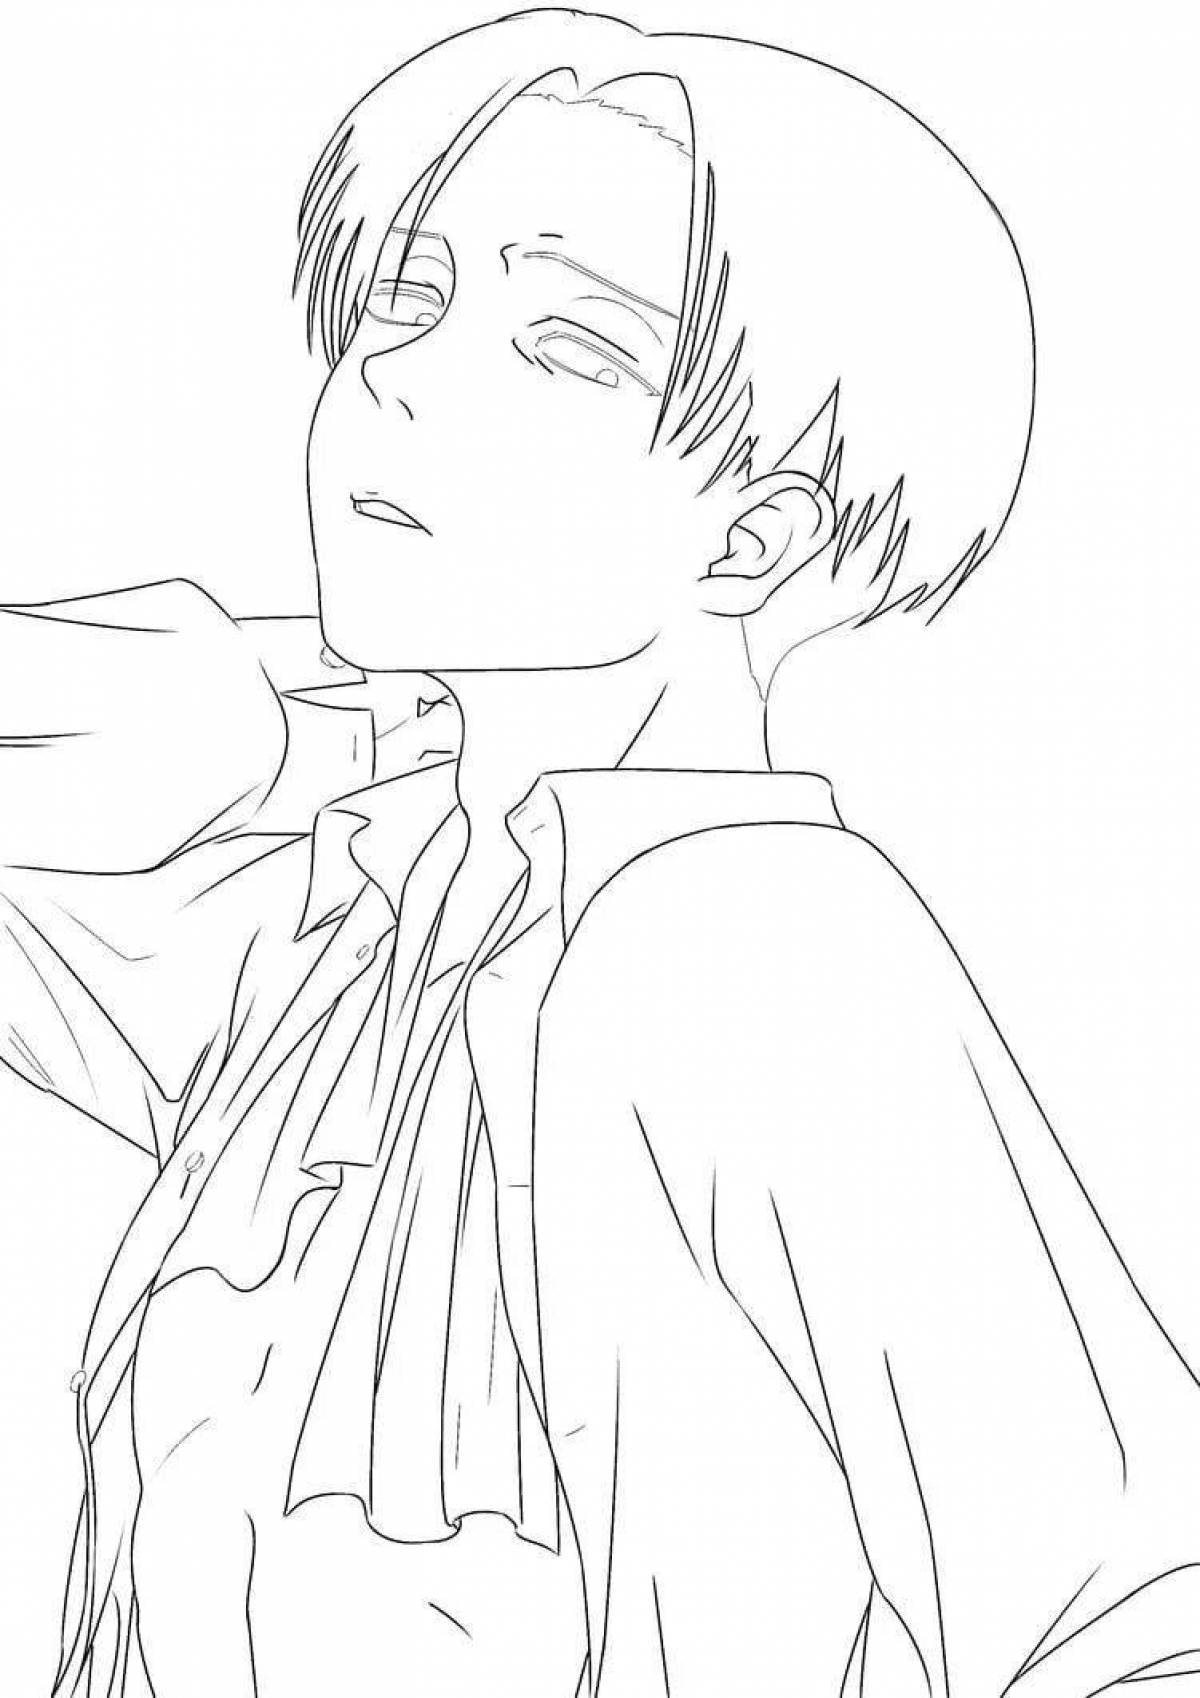 Levi's animated coloring page